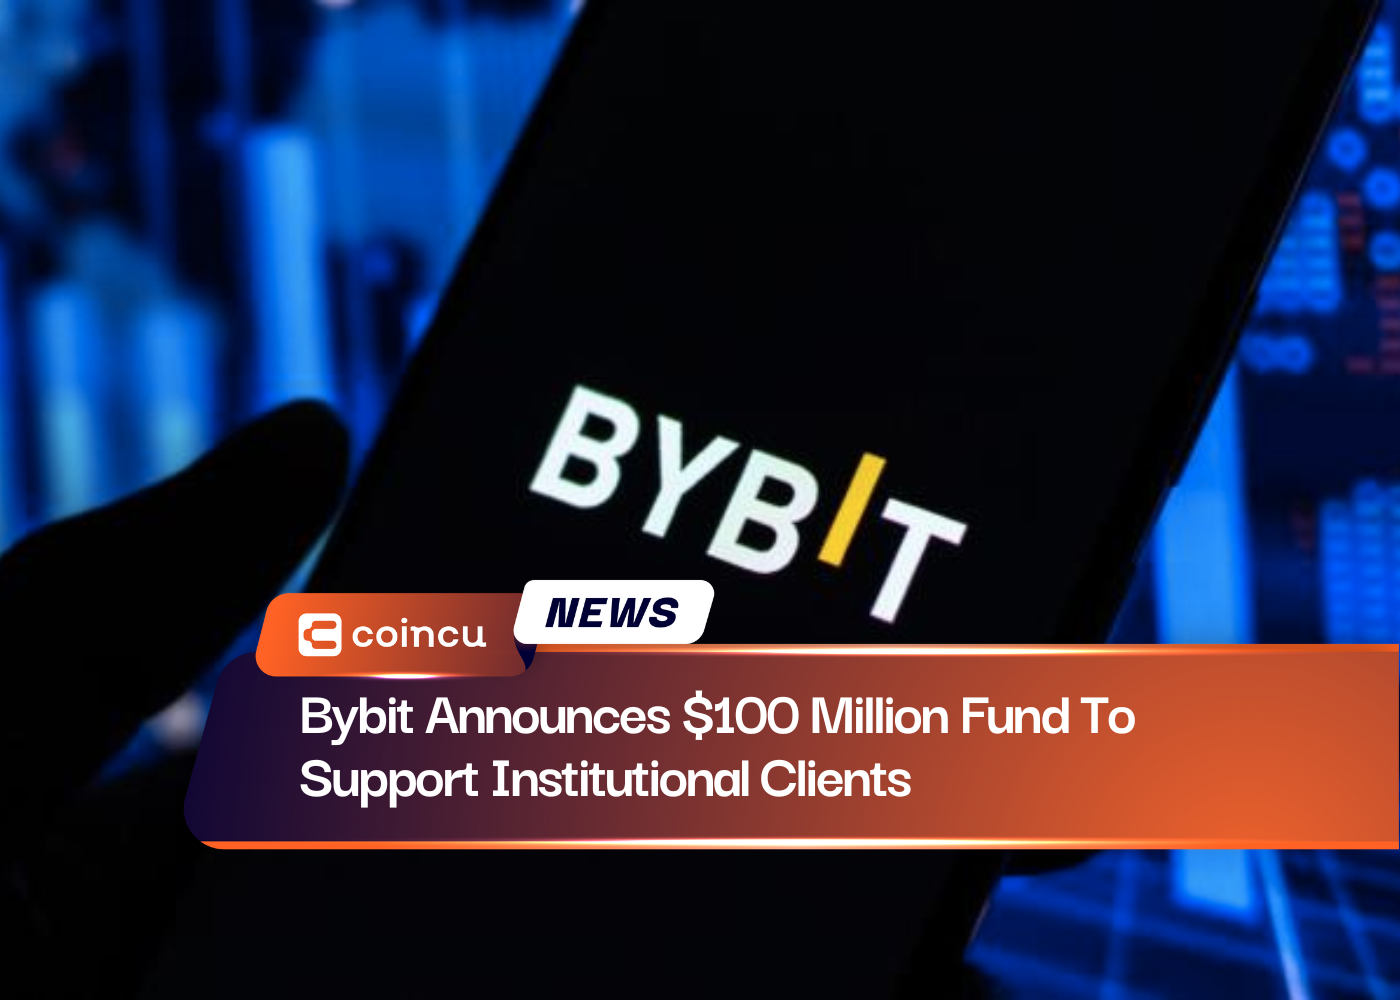 Bybit Announces $100 Million Fund To Support Institutional Clients